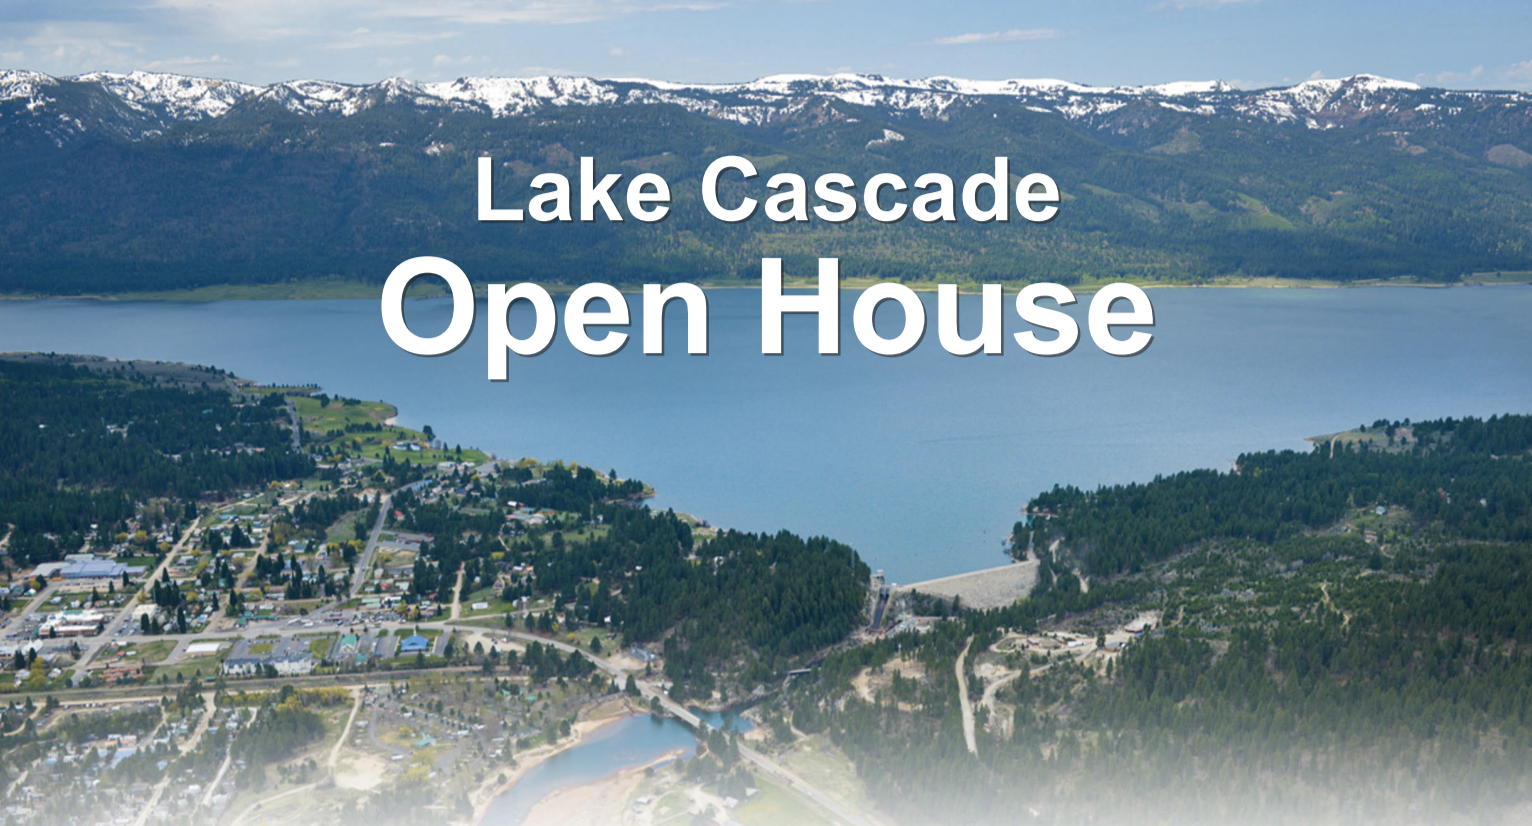 Past Event: Lake Cascade Open House 2019